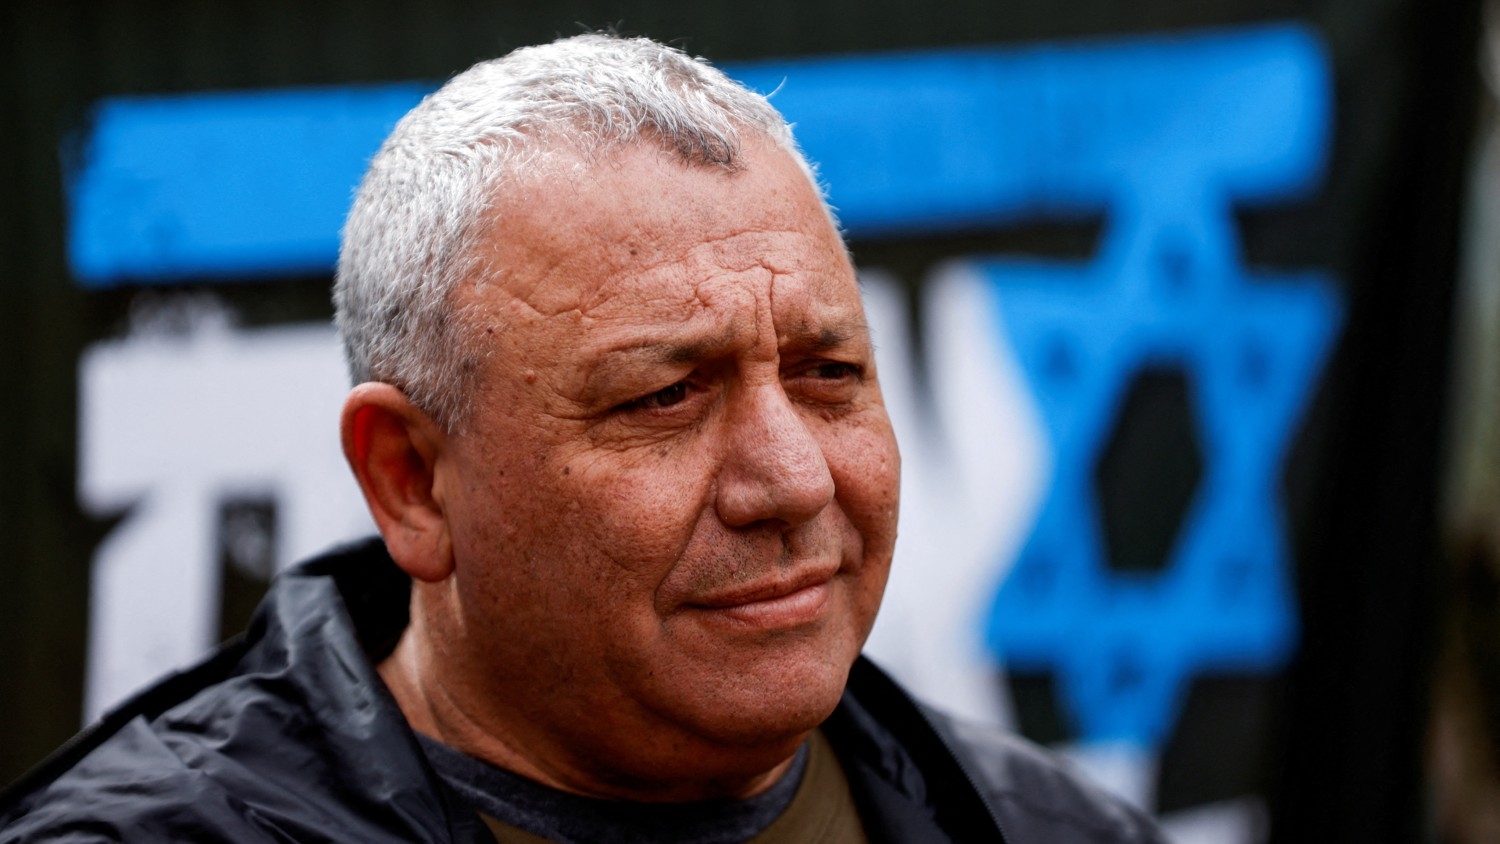 Knesset Member and former military chief Gadi Eisenkot attends a demonstration against proposed judicial reforms by Israel's government near Jerusalem on 9 February 2023.